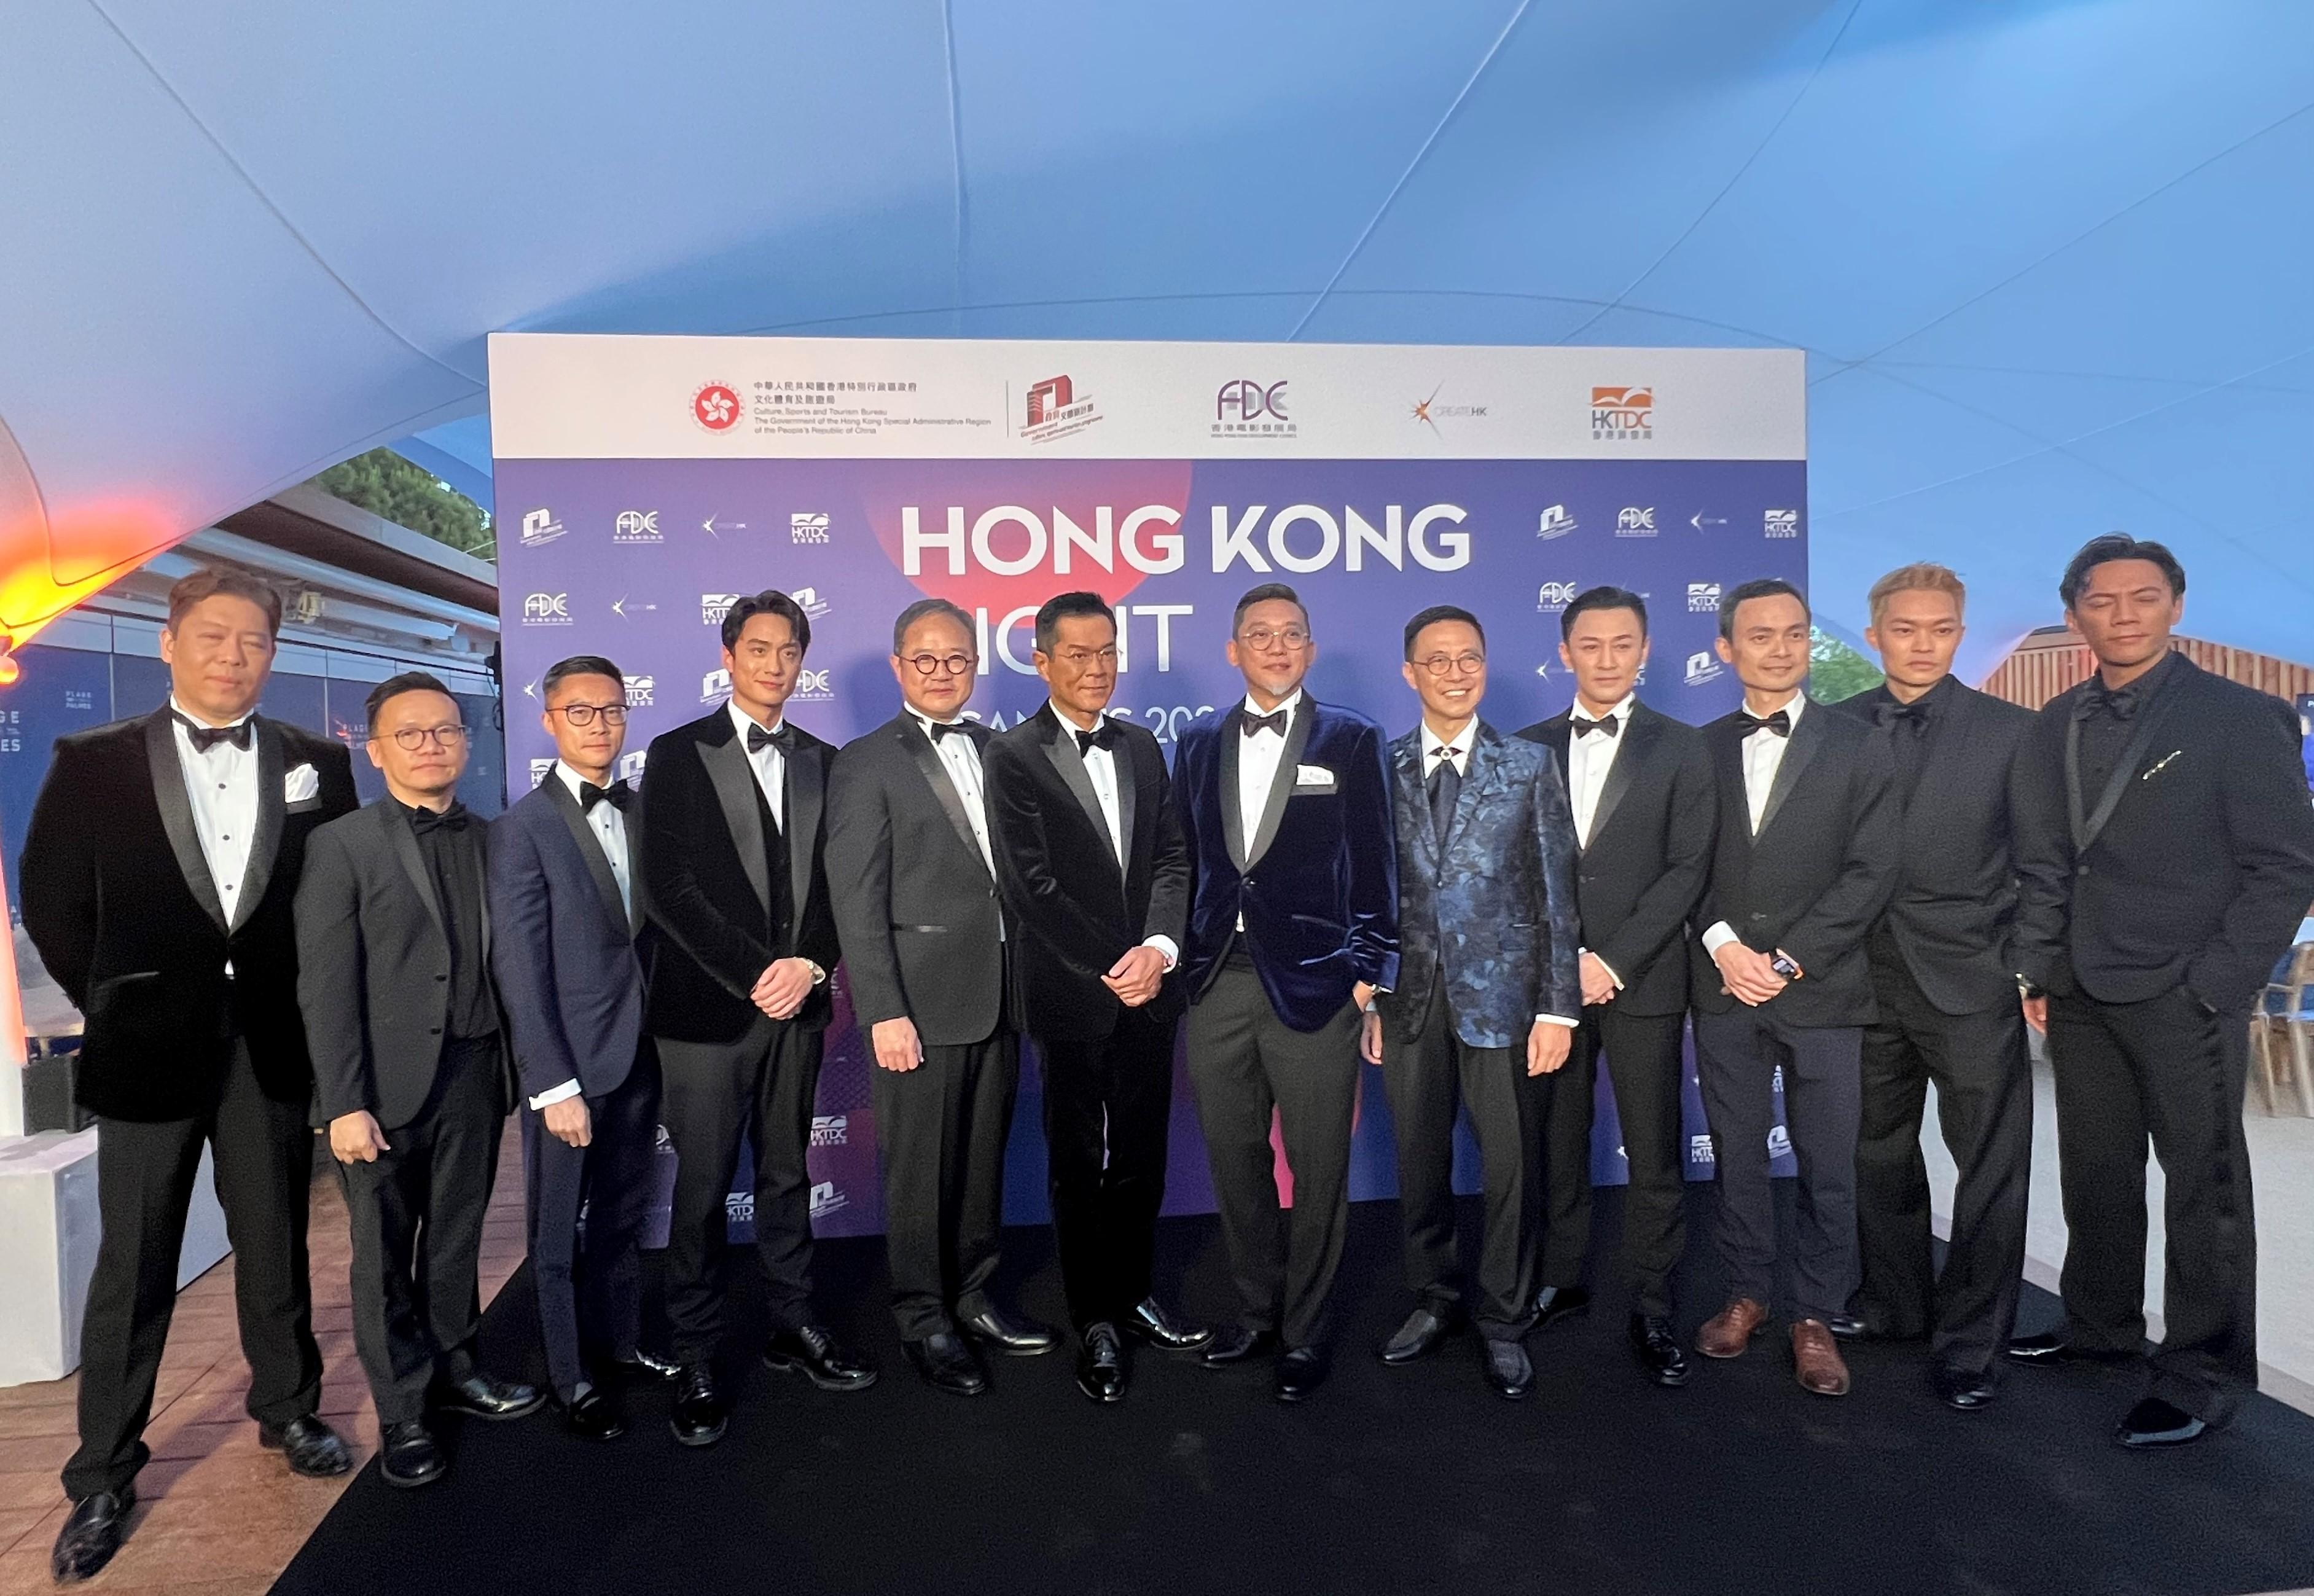 The Secretary for Culture, Sports and Tourism, Mr Kevin Yeung, led a Hong Kong film industry delegation to the 77th Cannes Film Festival in France and attended the Hong Kong Night reception on May 16 (Cannes time). Photo shows Mr Yeung (fifth right); the Permanent Secretary for Culture, Sports and Tourism, Mr Joe Wong (fifth left); Assistant Head of Create Hong Kong Mr Gary Mak (second left), and the crew of the Hong Kong film "Twilight of the Warriors: Walled In".